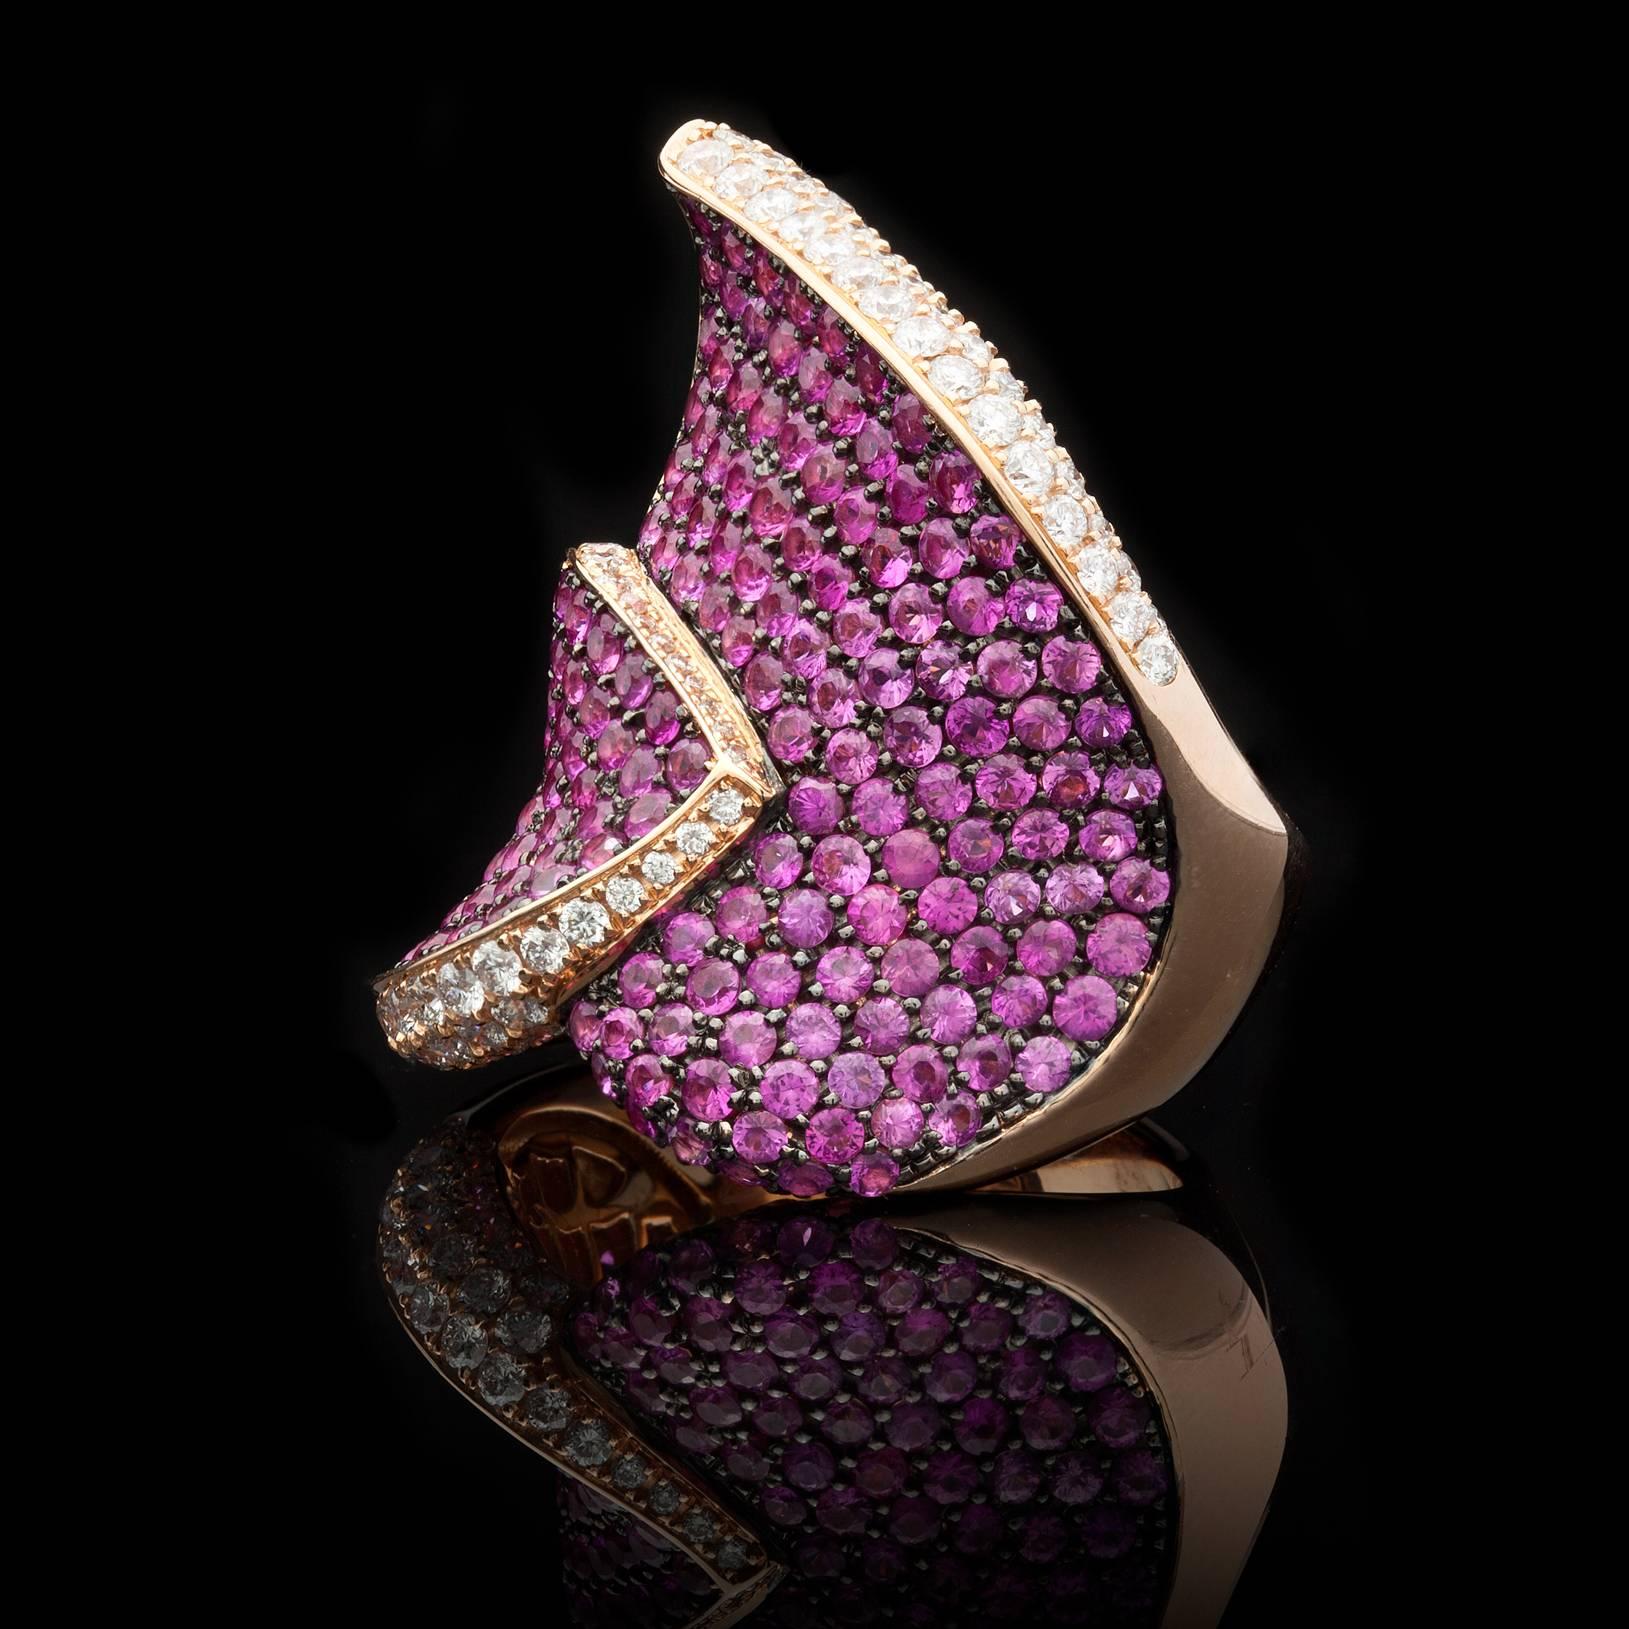 Exceptional Cocktail Ring by Salavetti features 5.31cts of Round Brilliant Cut Pink Sapphires accented by 110 Round Brilliant Cut Diamonds for approximately 1.27cts. The total weight of the ring is 22.24 grams and the face of the ring measures 24mm